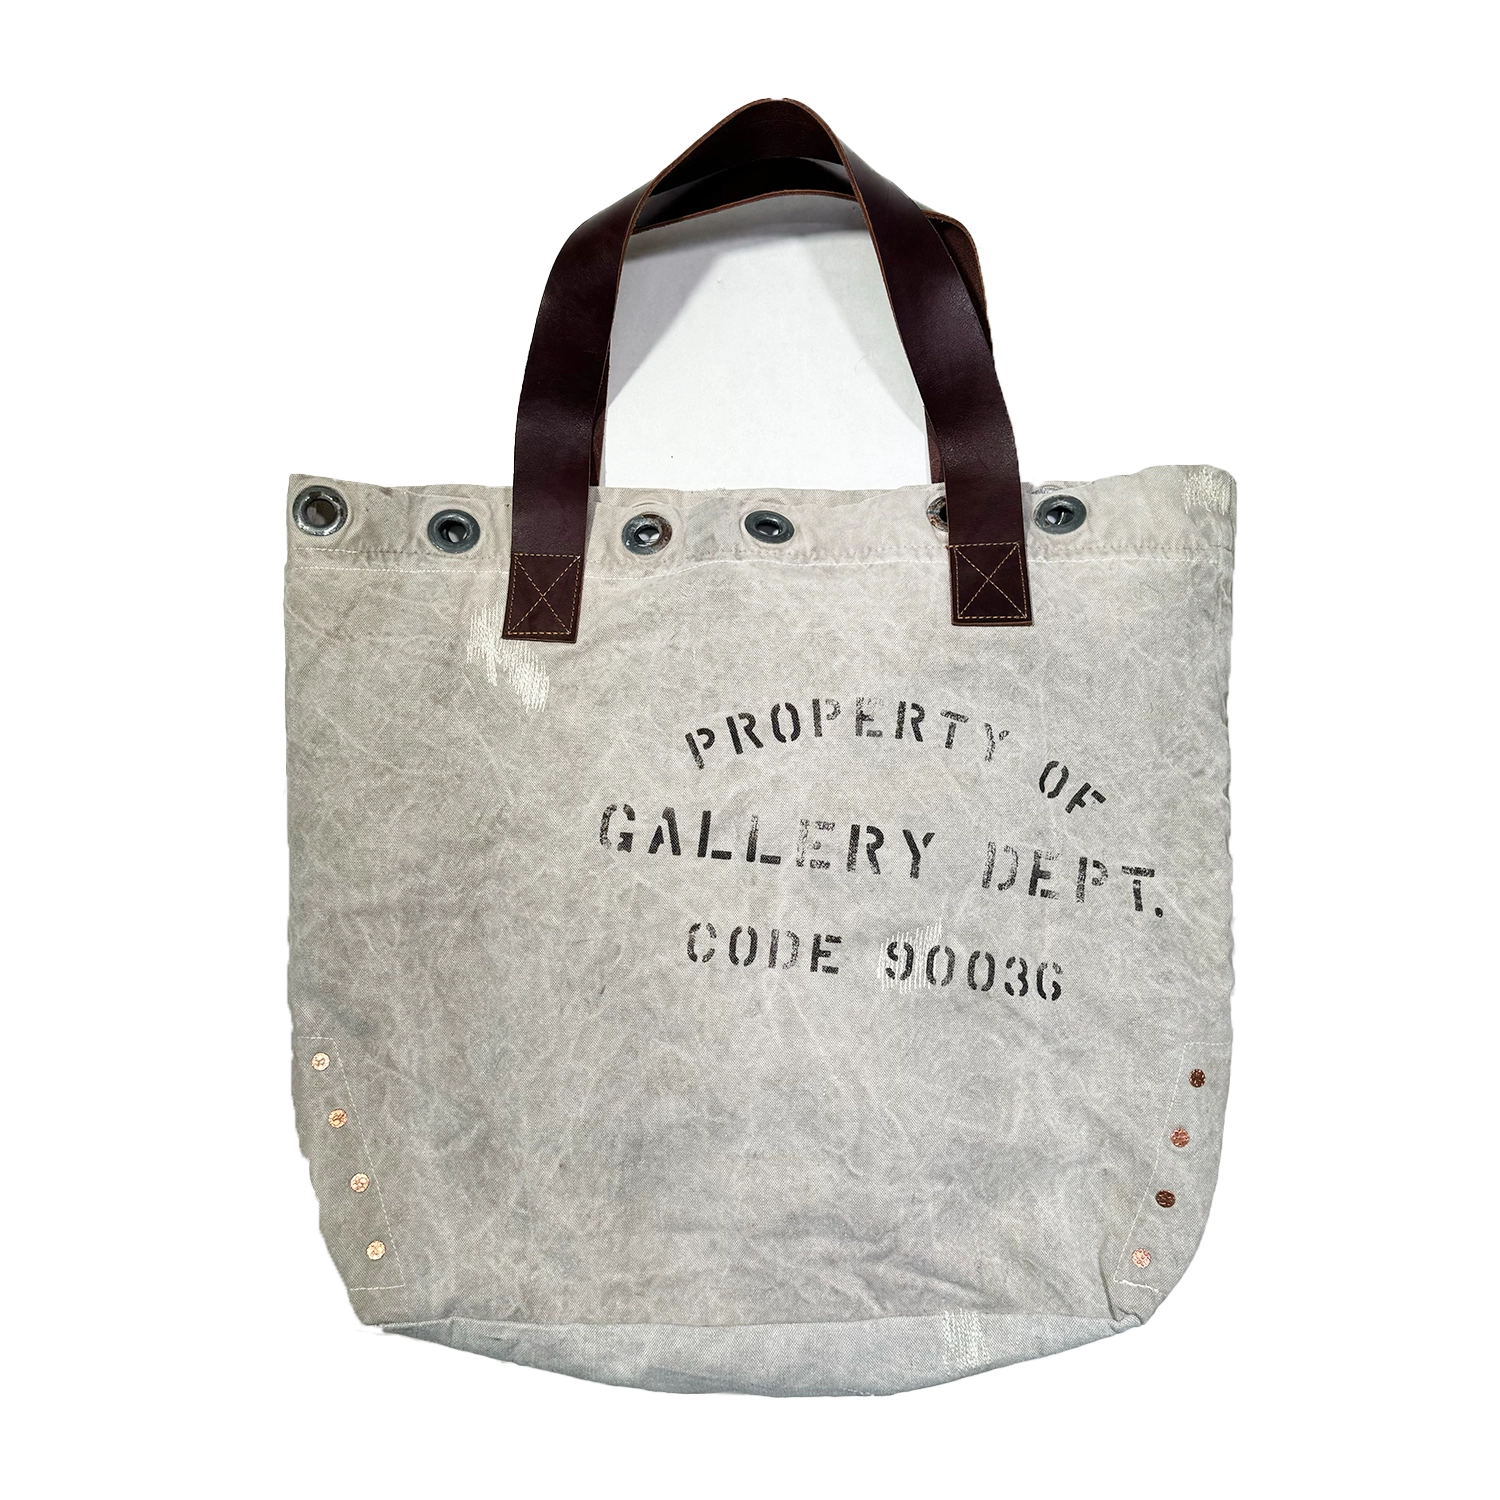 GALLERY DEPT. / TOOL TOTE CANVAS